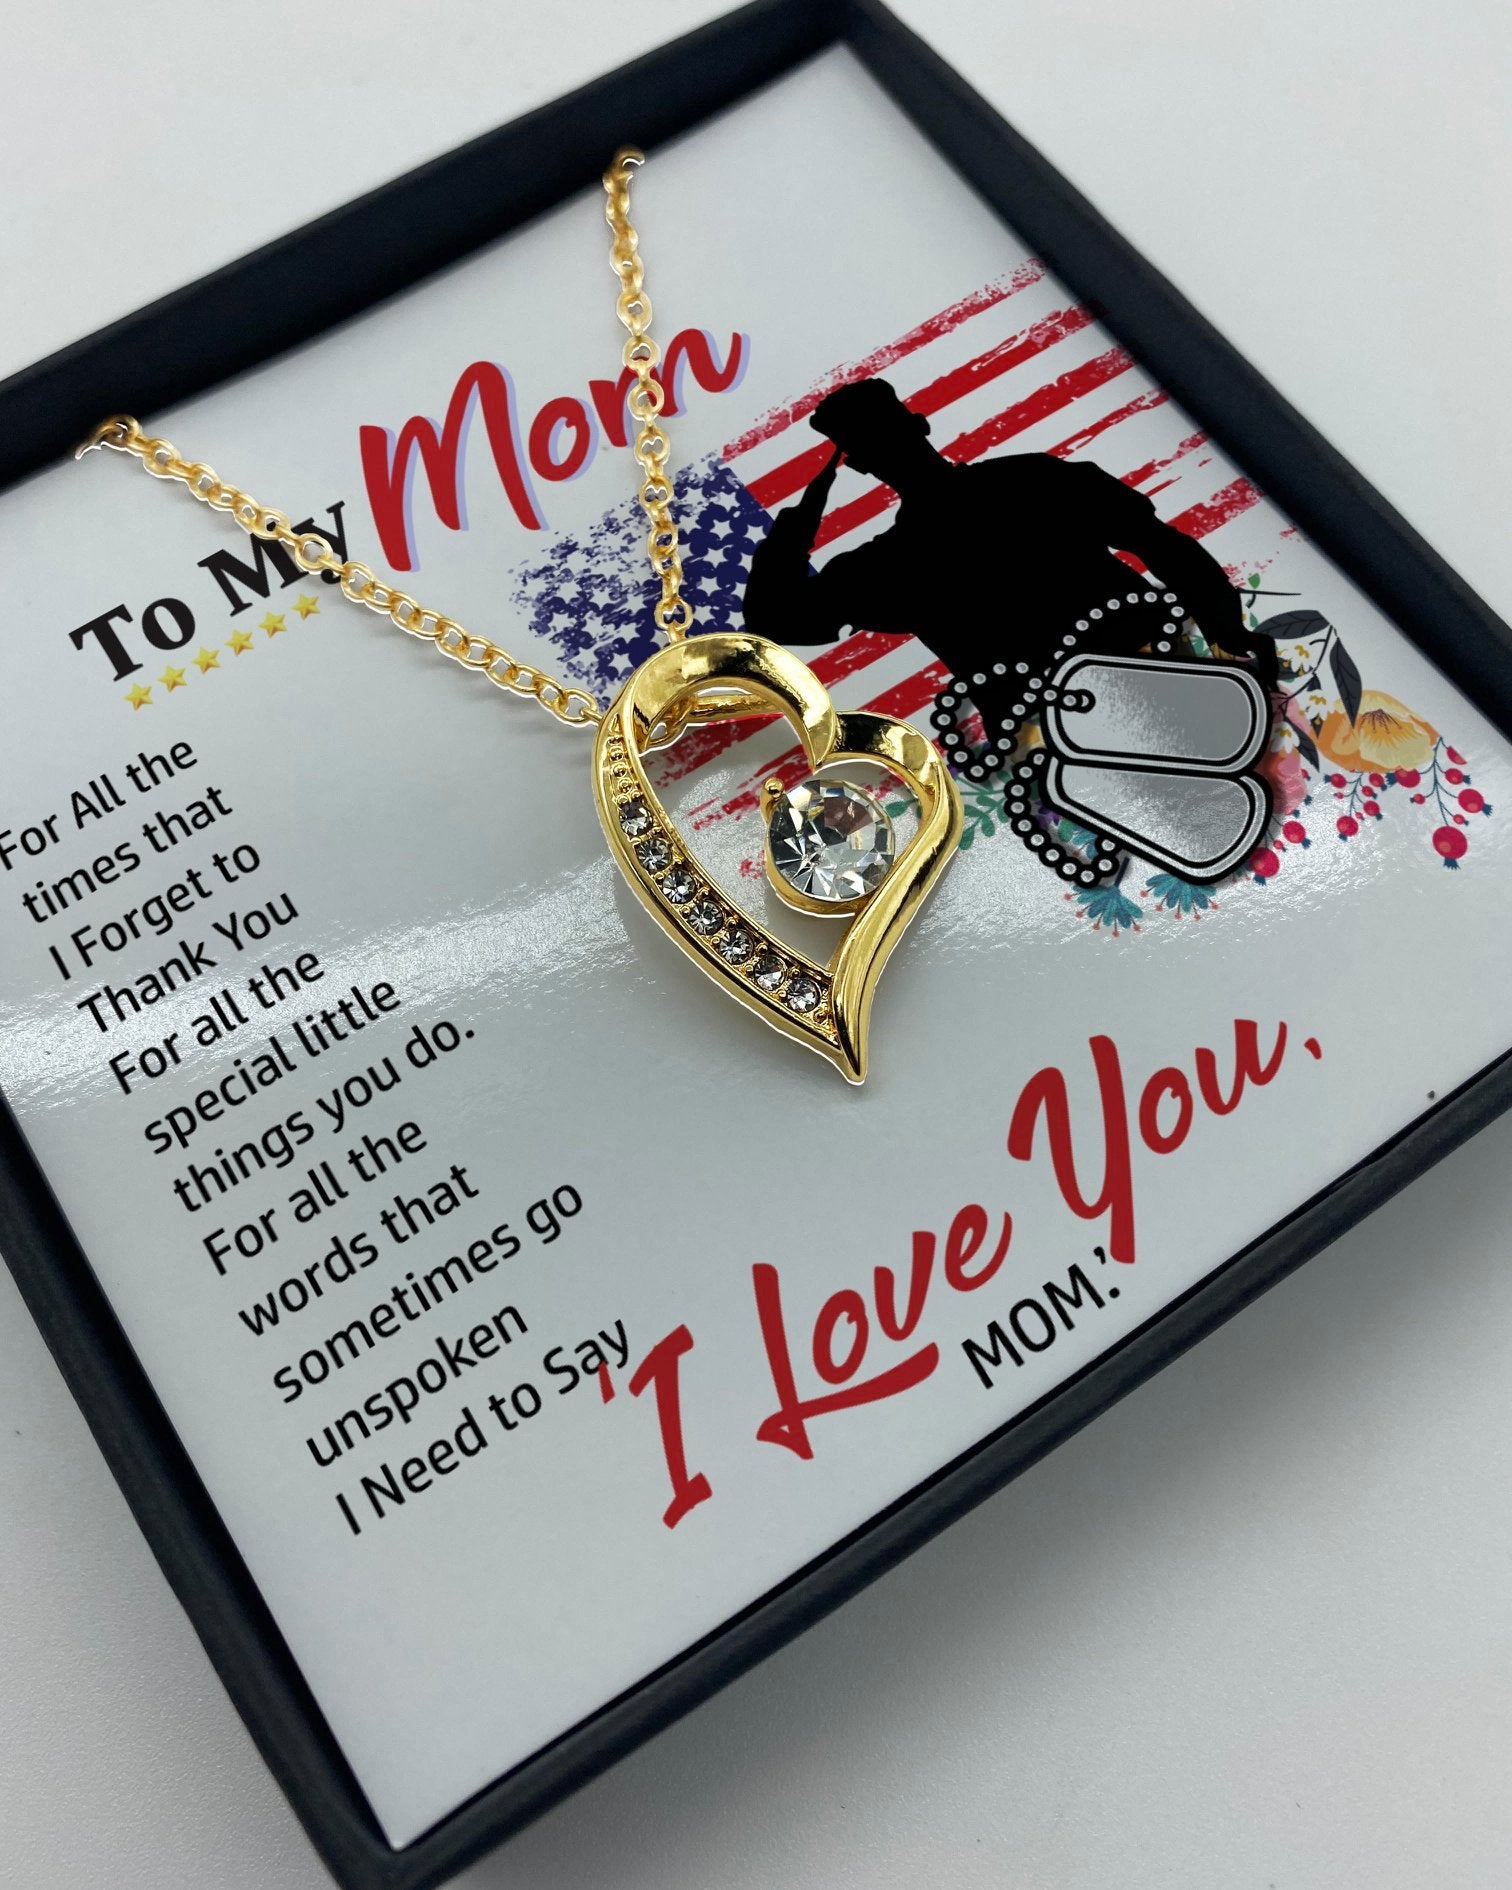 I Need To Say I Love You Necklace With Message Card, Meaningful Mother’s Day Gift, Happy Mother’s Day Ideas 1617090073543.jpg